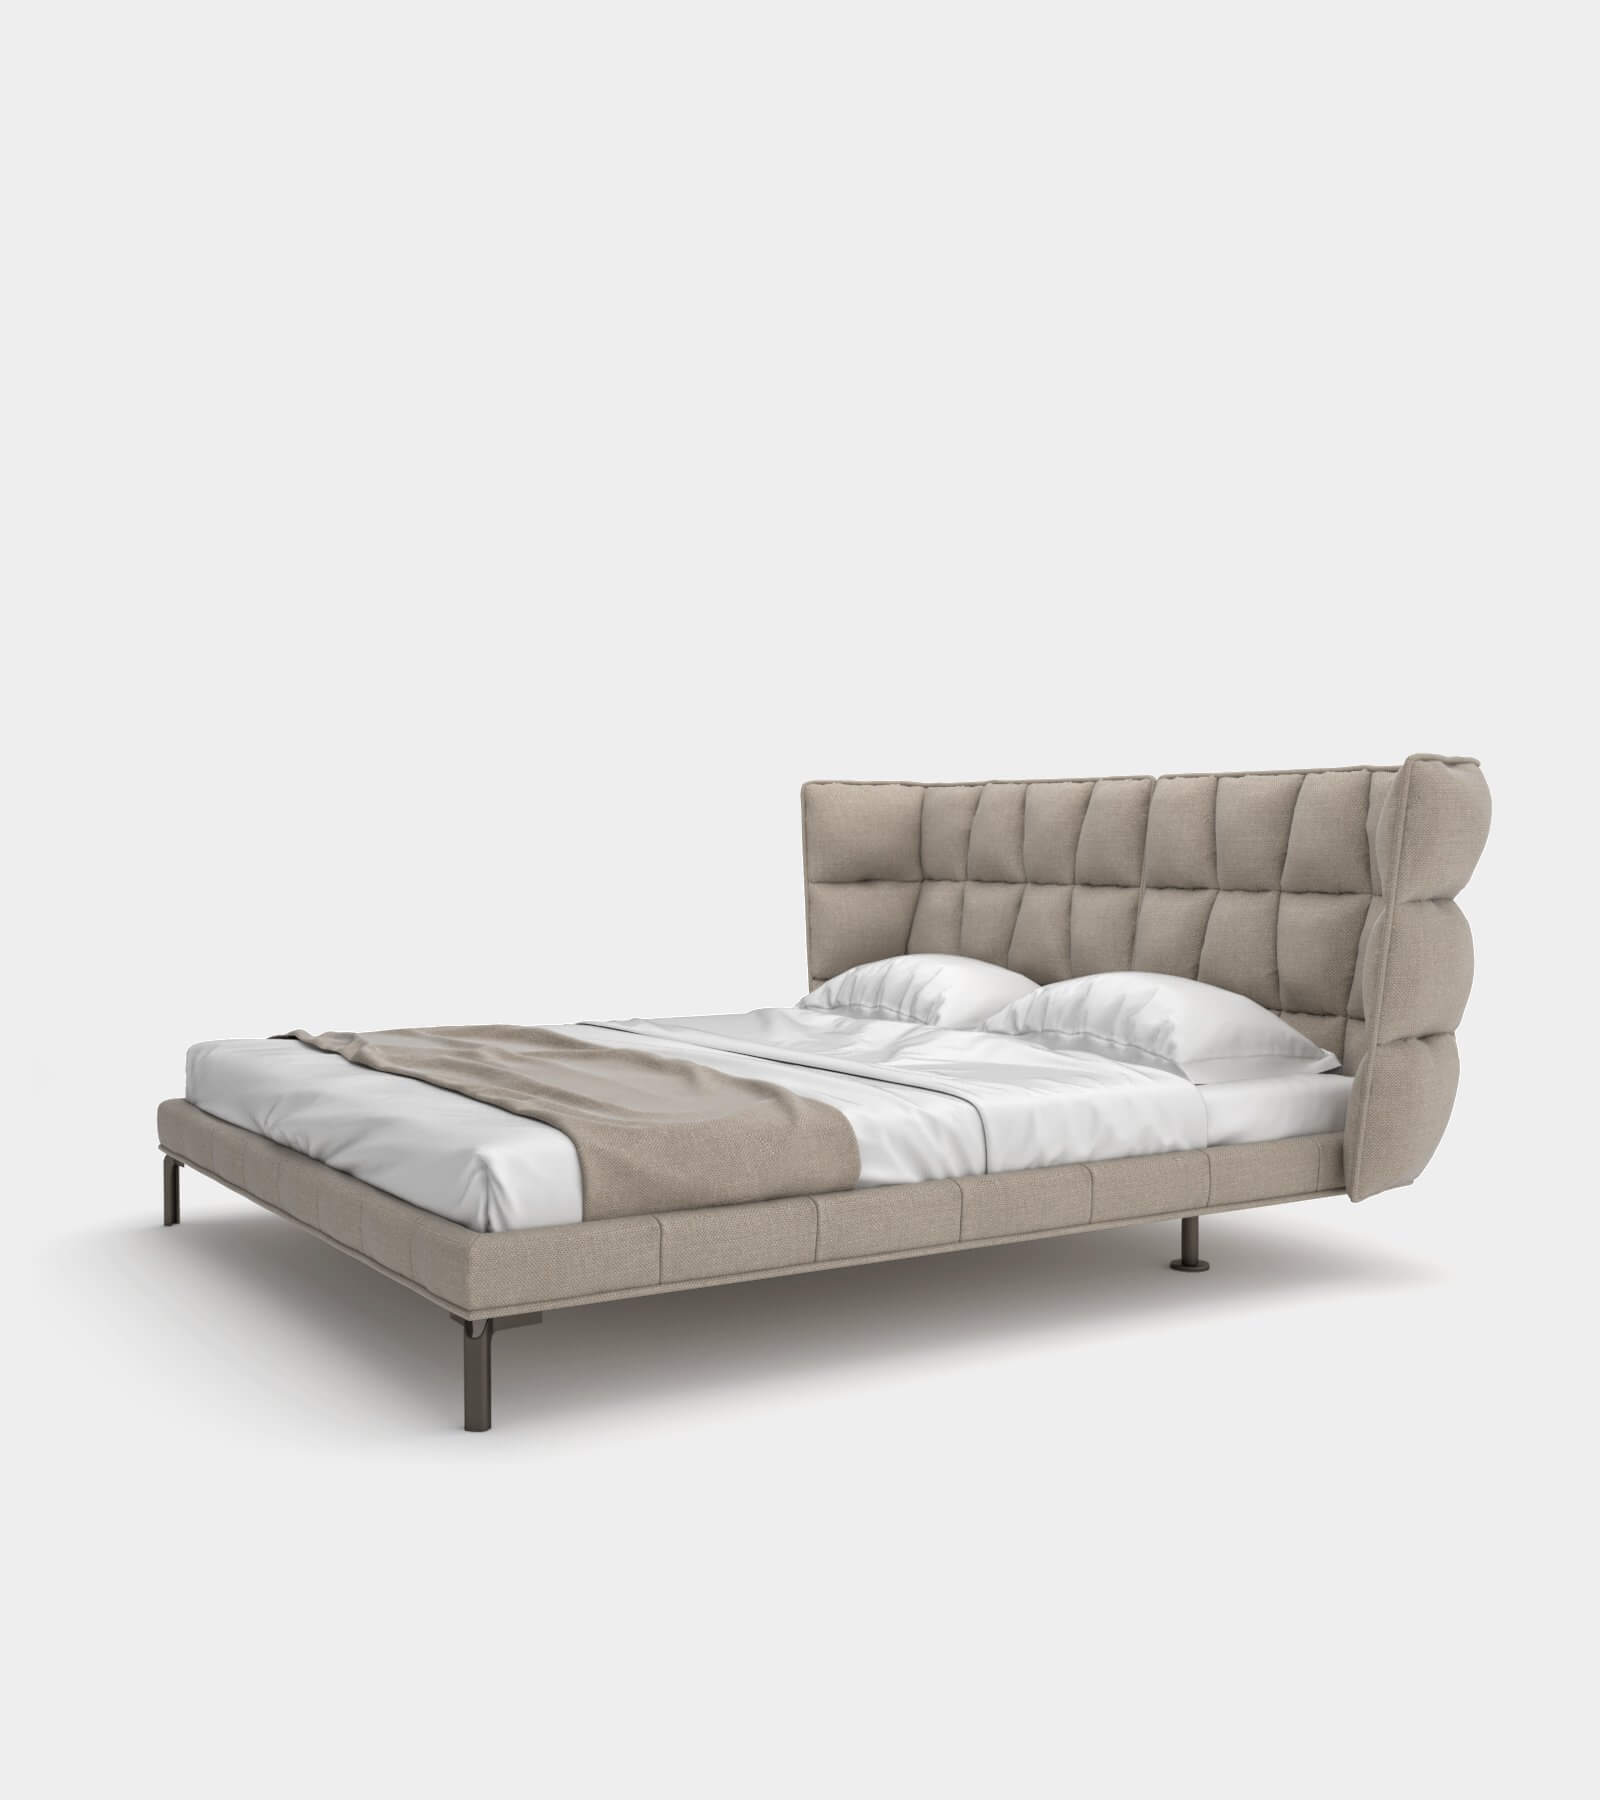 Modern bed with upholstered headboard-2 3D Model